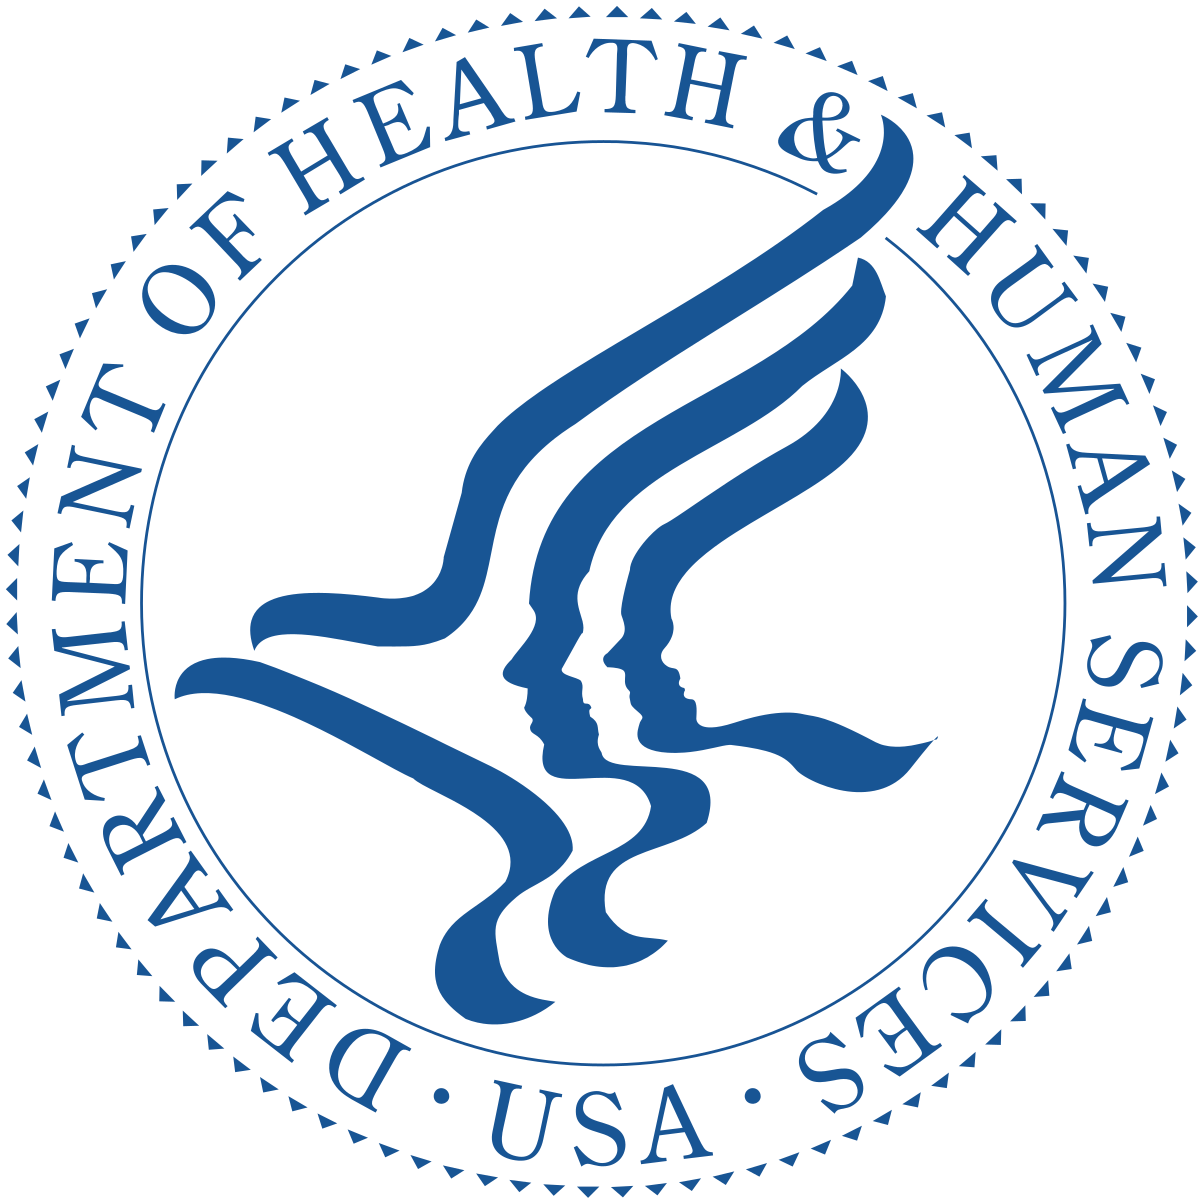 US_Department_of_Health_and_Human_Services_seal.svg (1)